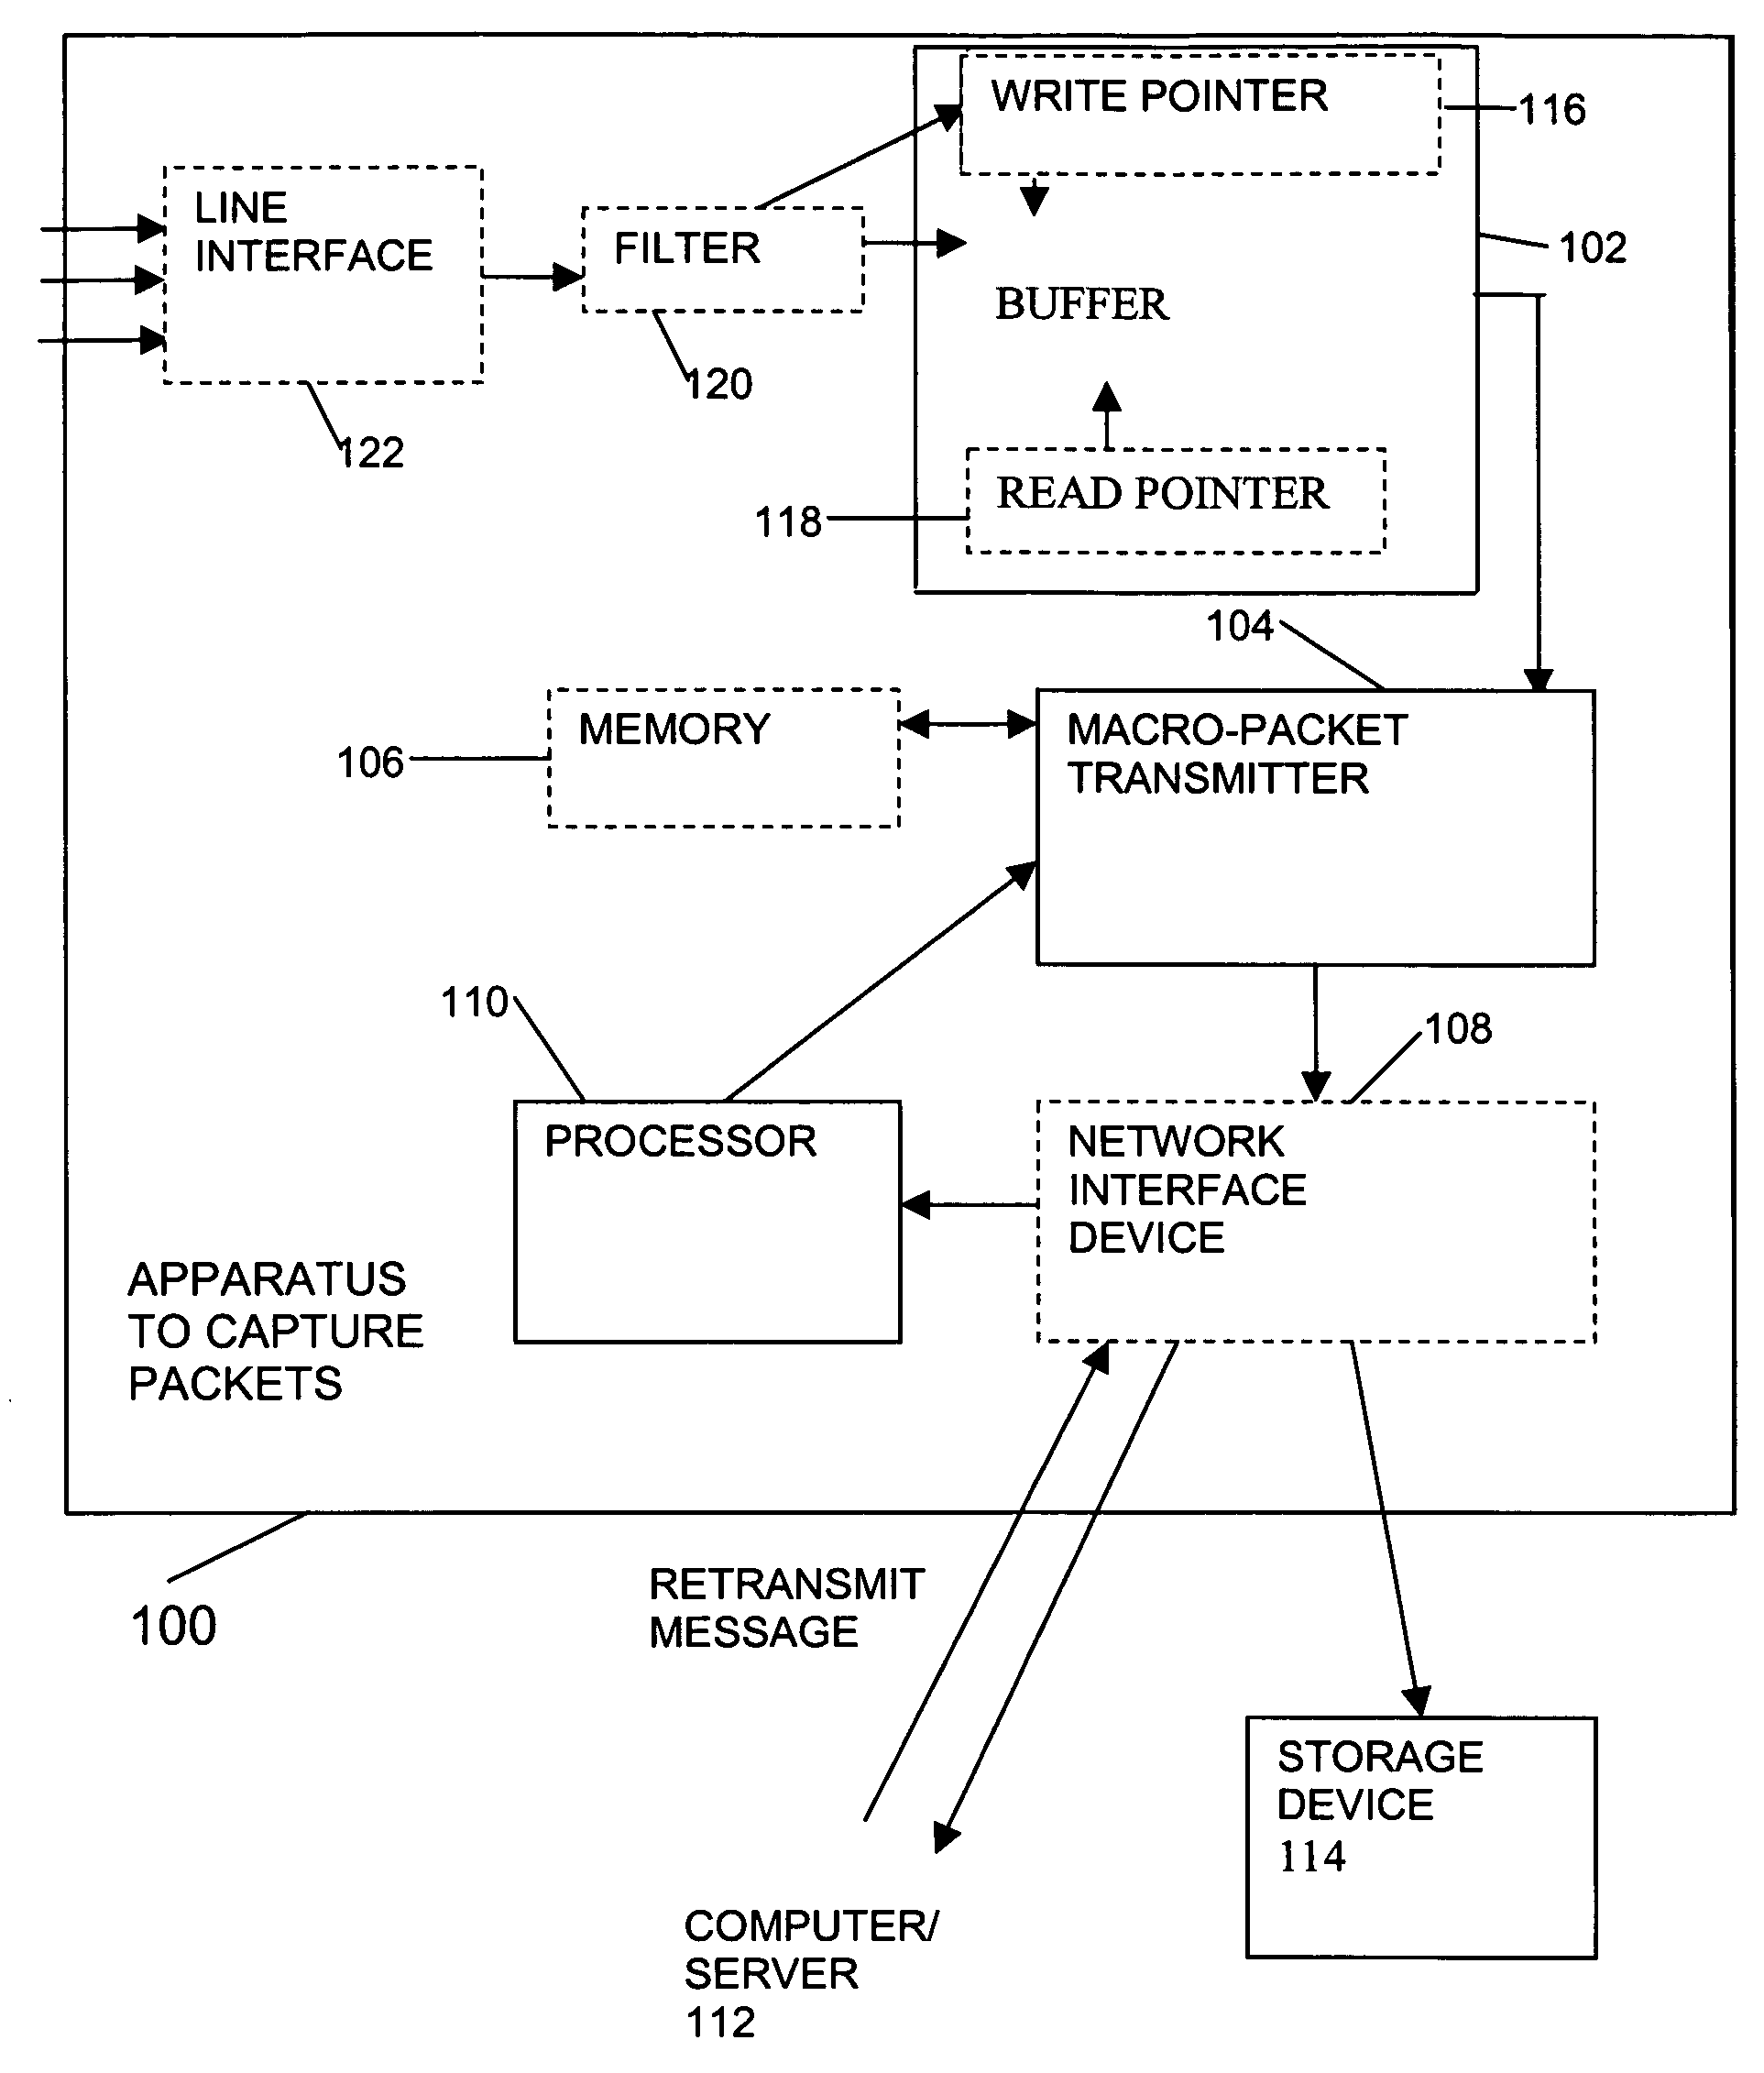 High speed acquisition system that allows capture from a packet network and streams the data to a storage medium